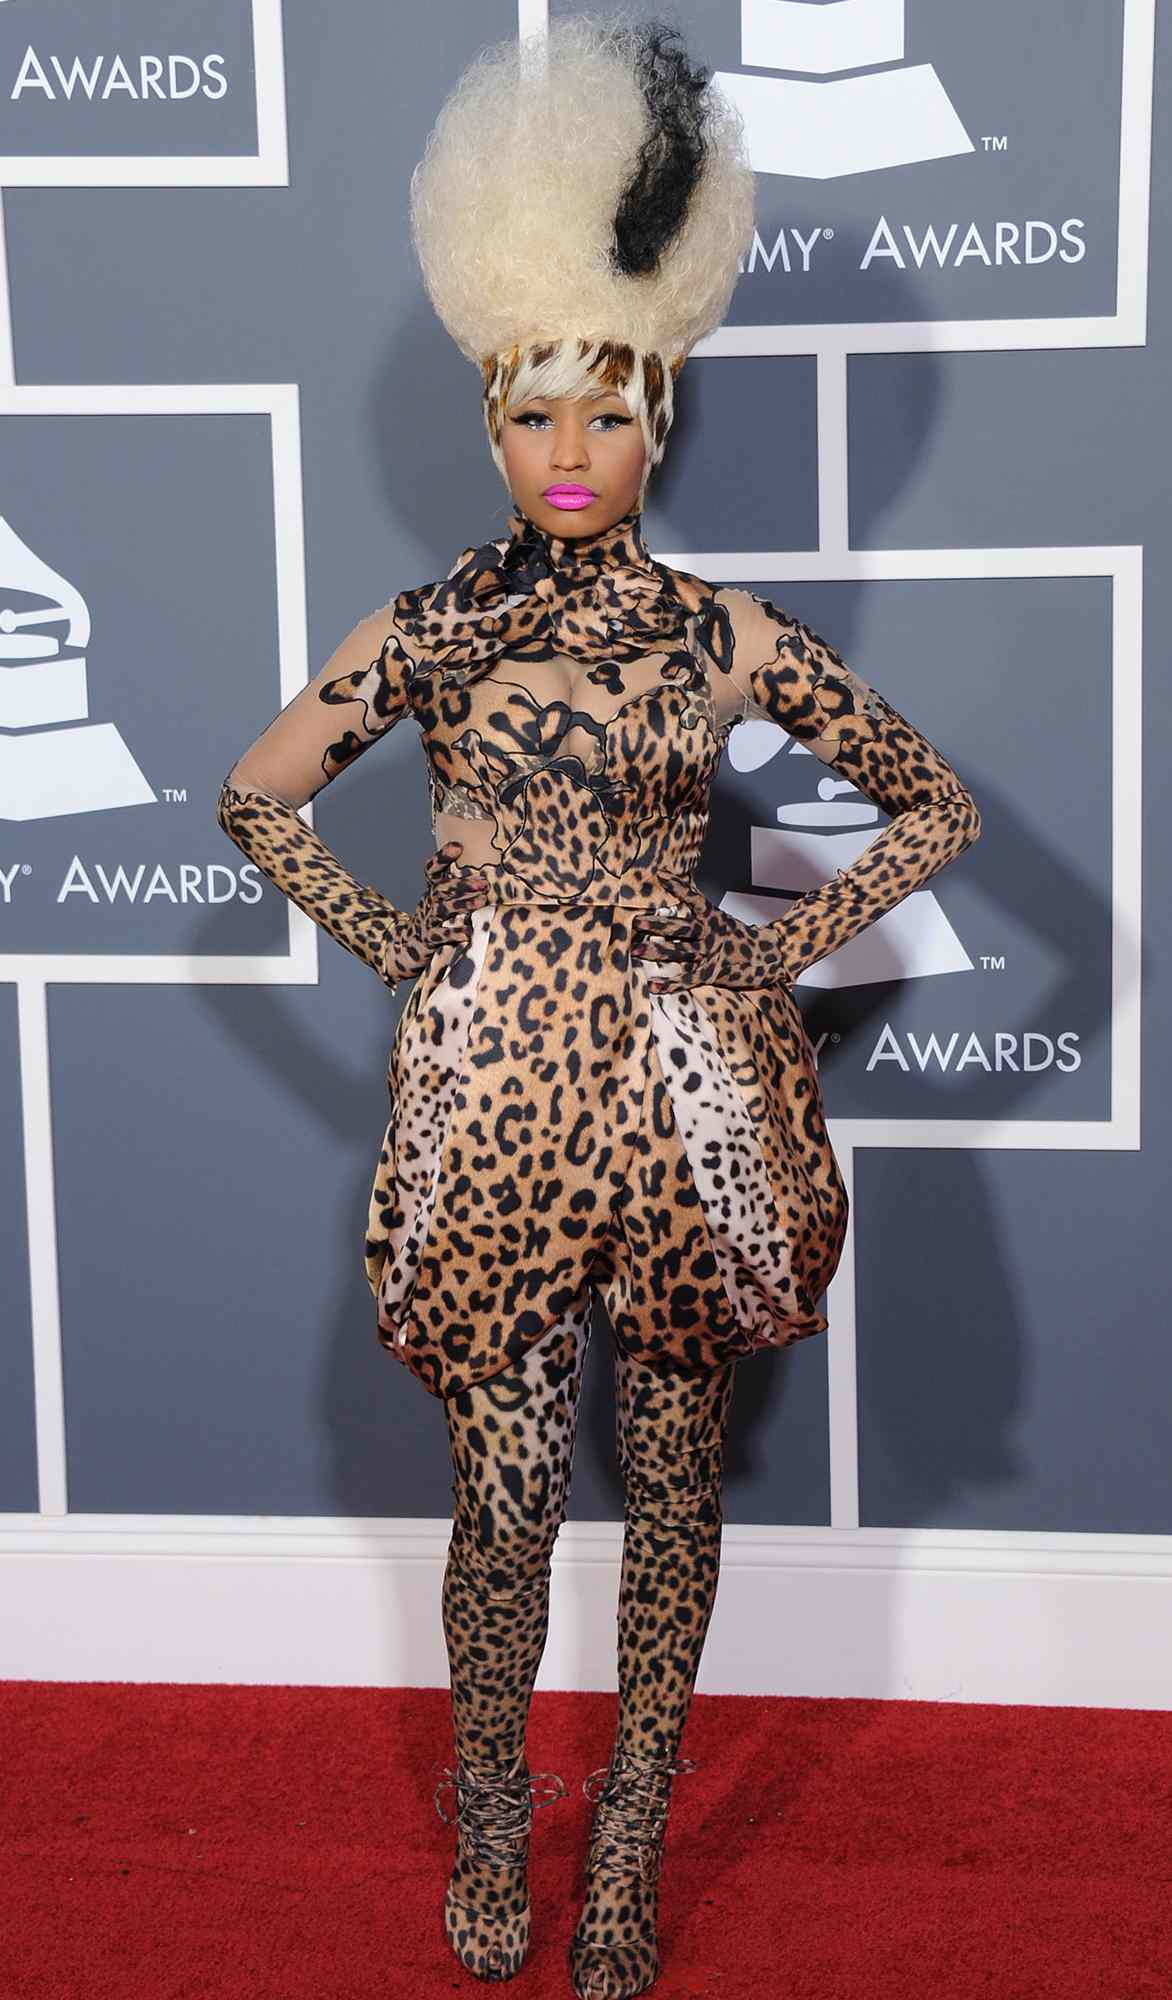 Nicki Minaj arrives at The 53rd Annual GRAMMY Awards at Staples Center on February 13, 2011 in Los Angeles, California